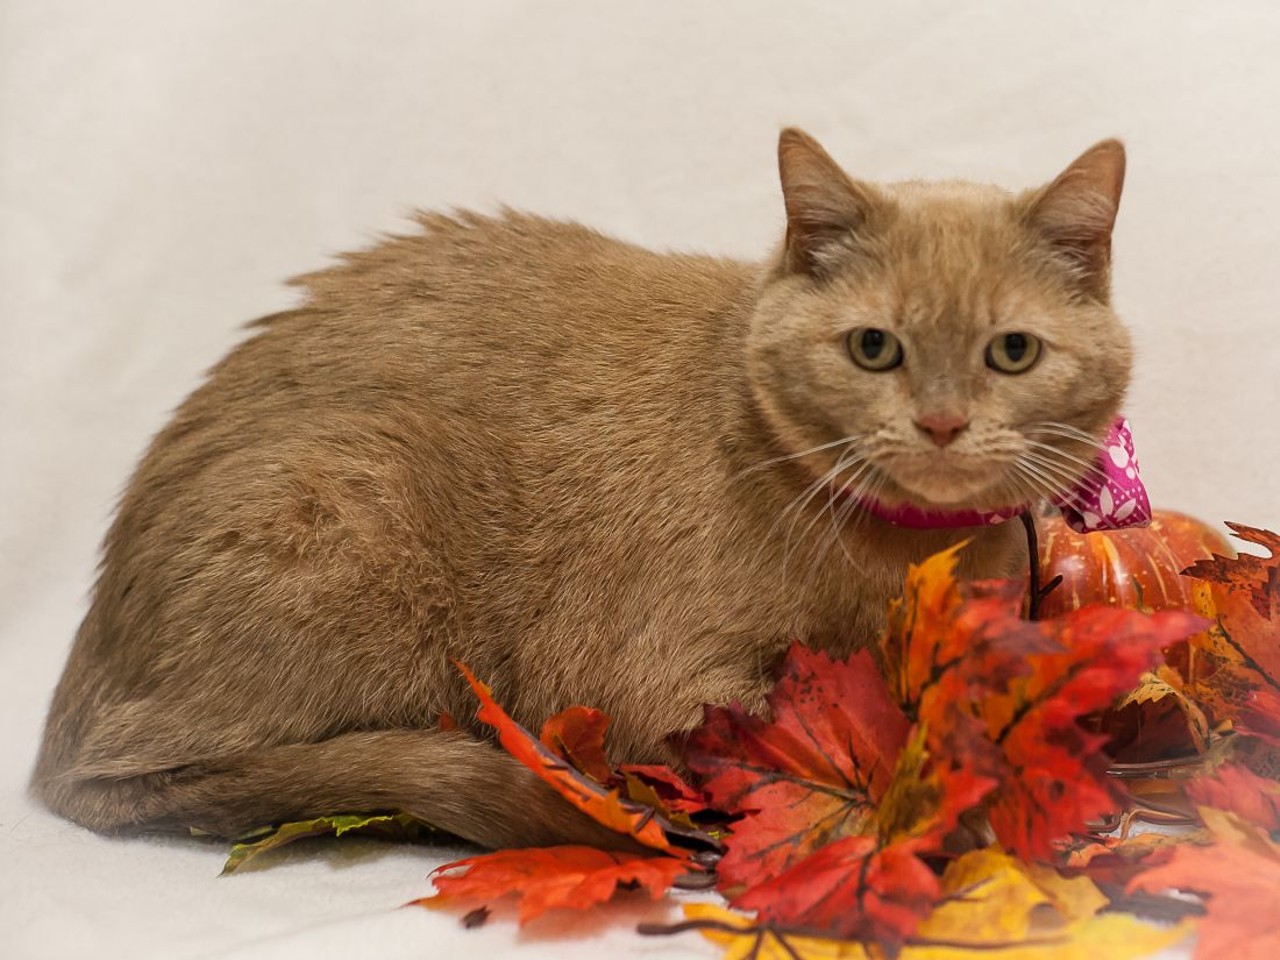 NAME: Pumpkin
GENDER: Female
BREED: Domestic Short Hair
AGE: 4 years, 2 months
WEIGHT: 9 pounds
SPECIAL CONSIDERATIONS: Children may startle her
REASON I CAME TO MHS: Owner surrender
LOCATION: PetSmart of Roseville
ID NUMBER: 860080